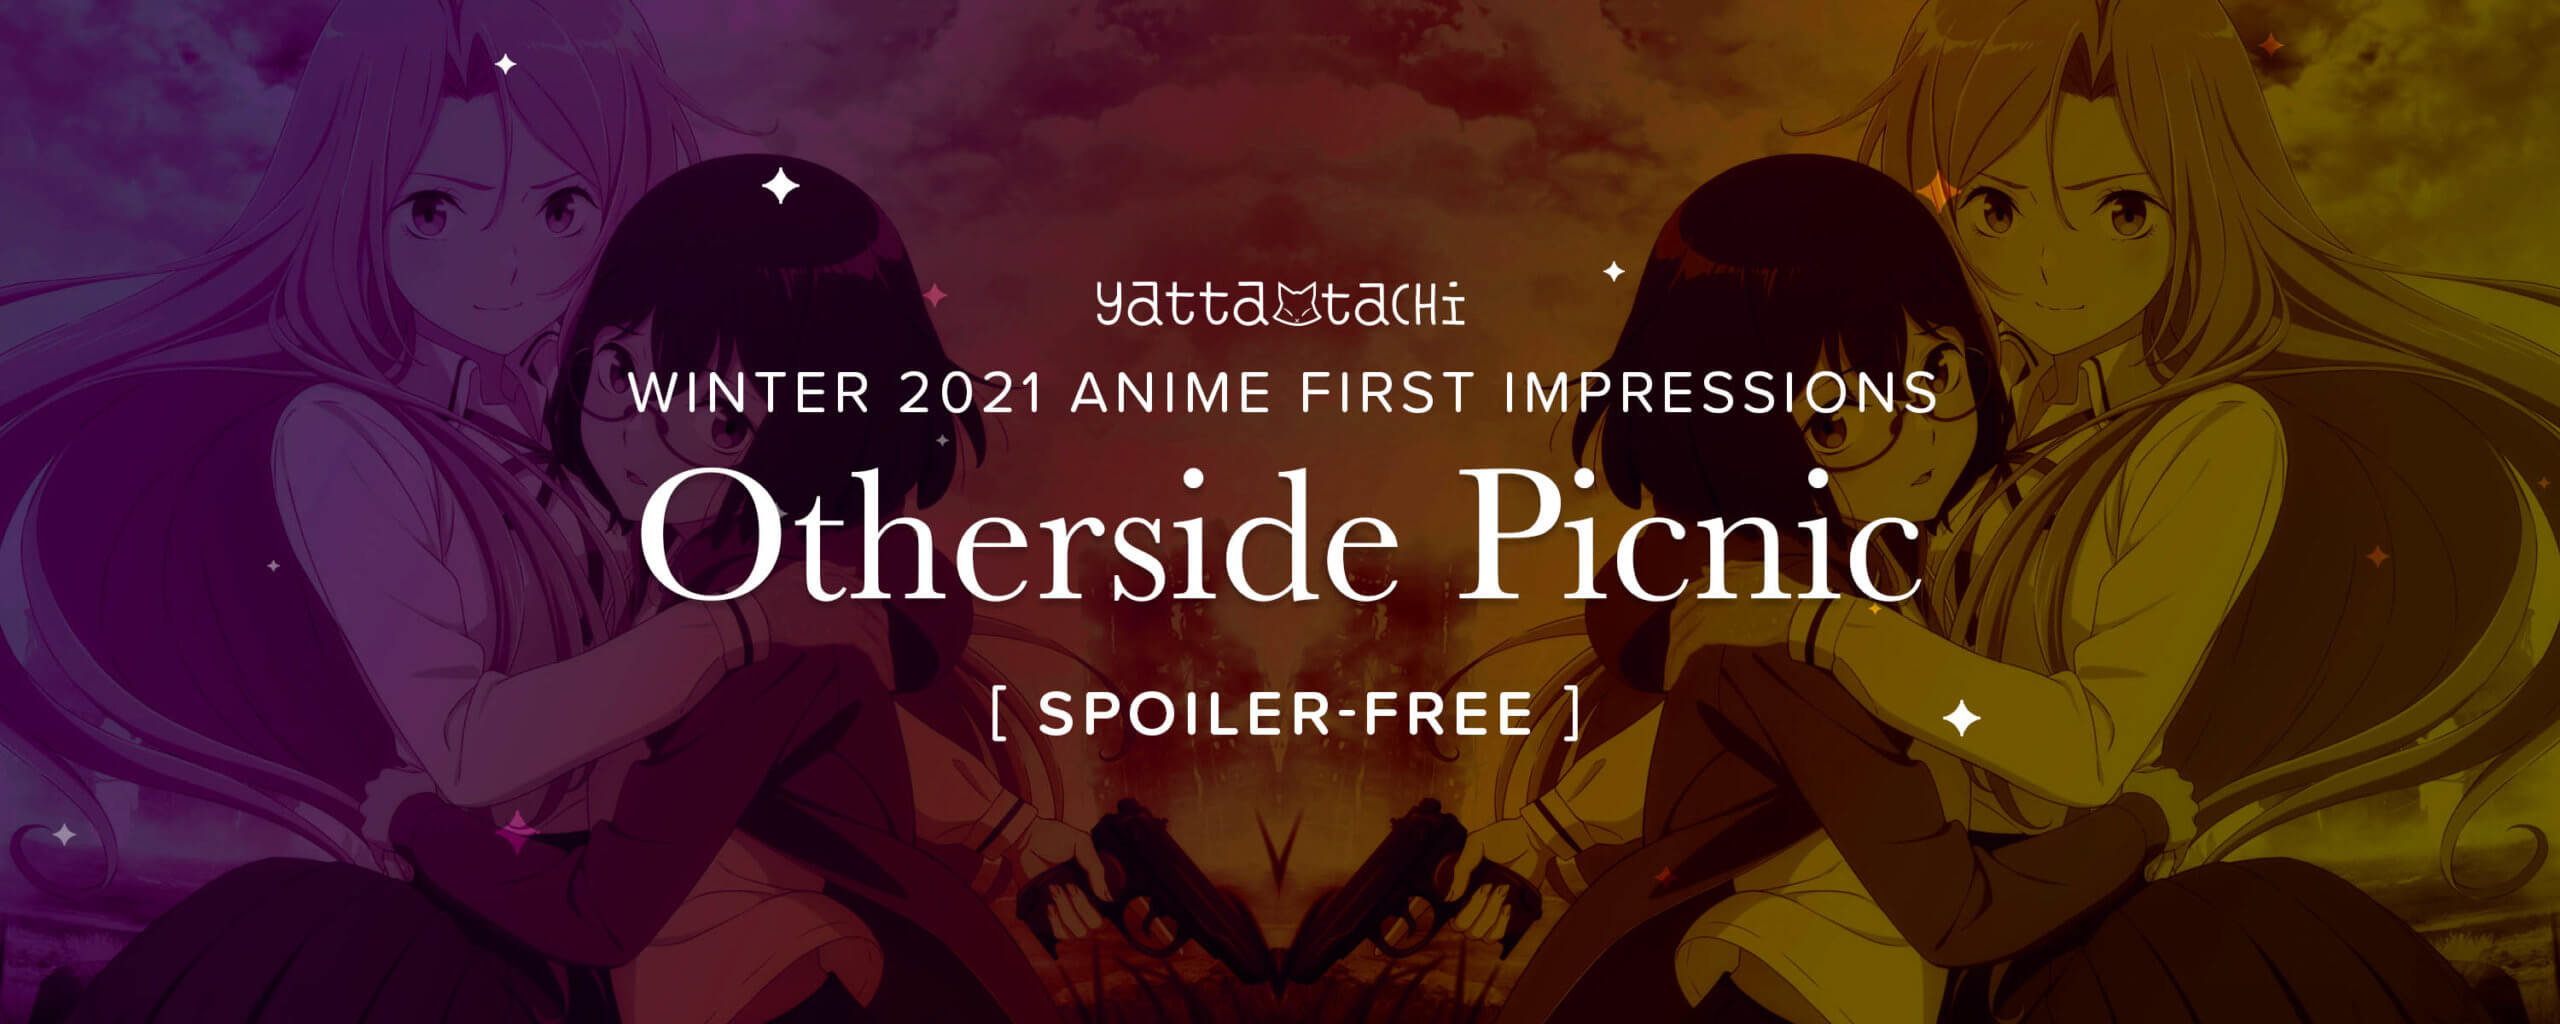 Otherside Picnic - Winter 2021 Anime First Impressions (Spoiler